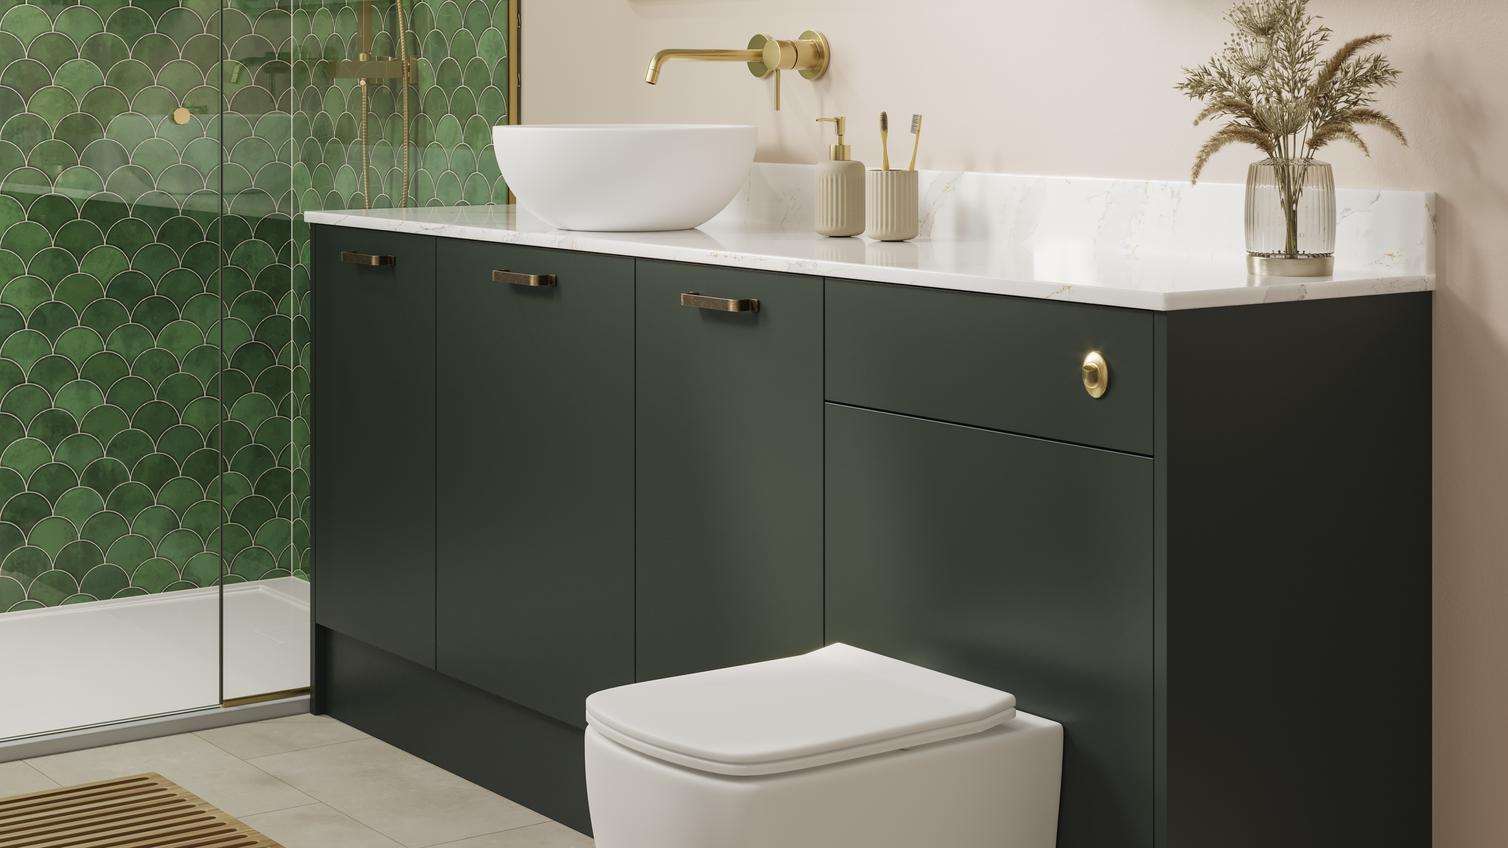 A Hockley green bathroom with dark cabinets & sink with gold accessories. Inside are toilet, sink, & tiled flooring.